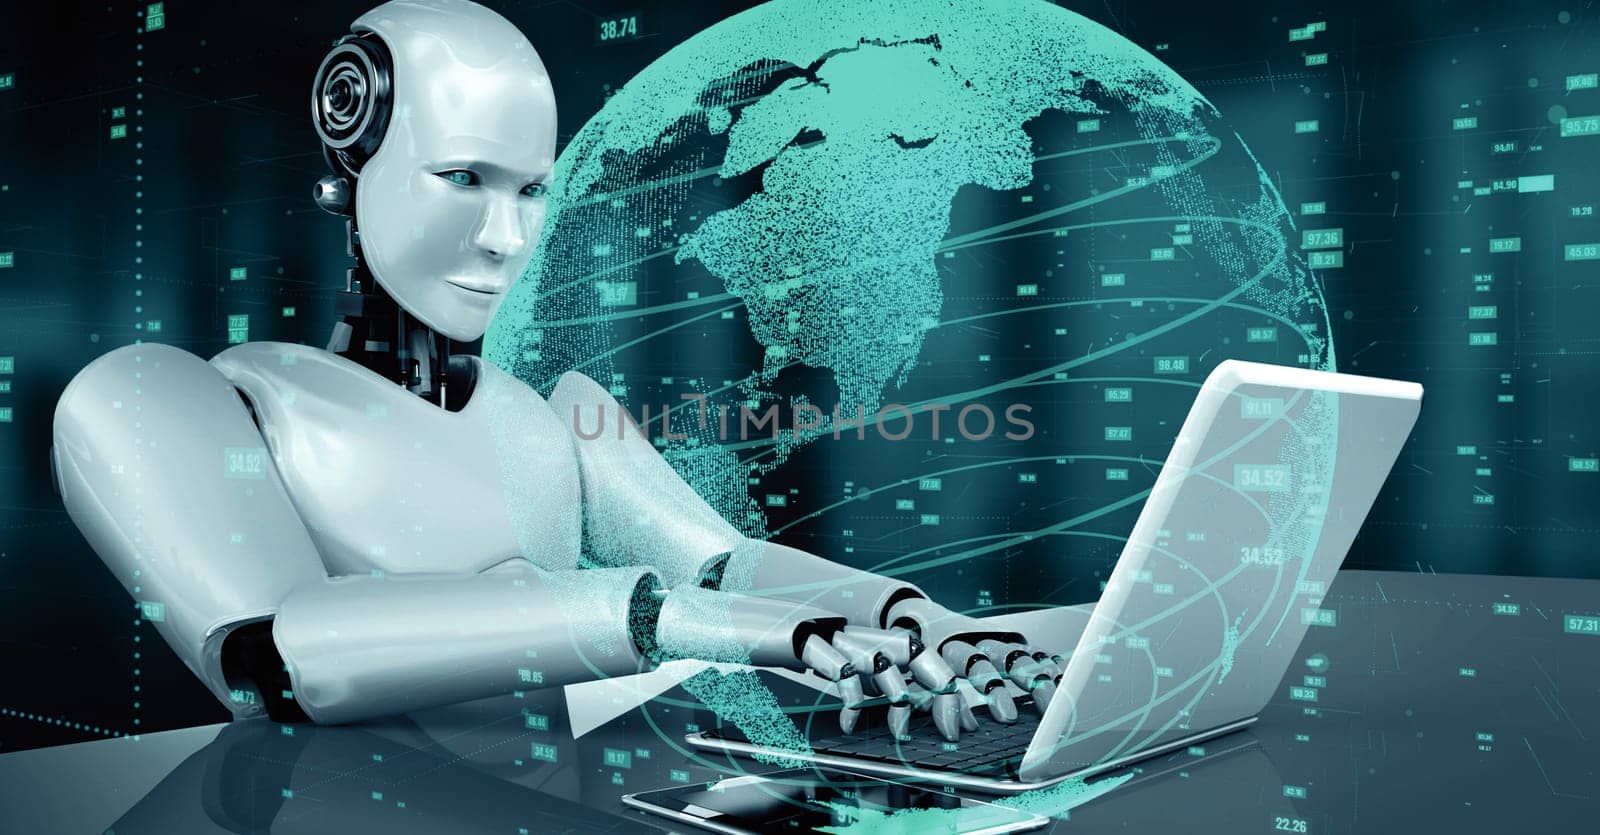 XAI 3d illustration Futuristic robot artificial intelligence huminoid AI data analytic technology development and machine learning concept. Global robotic bionic science research for future of human life. 3D rendering.